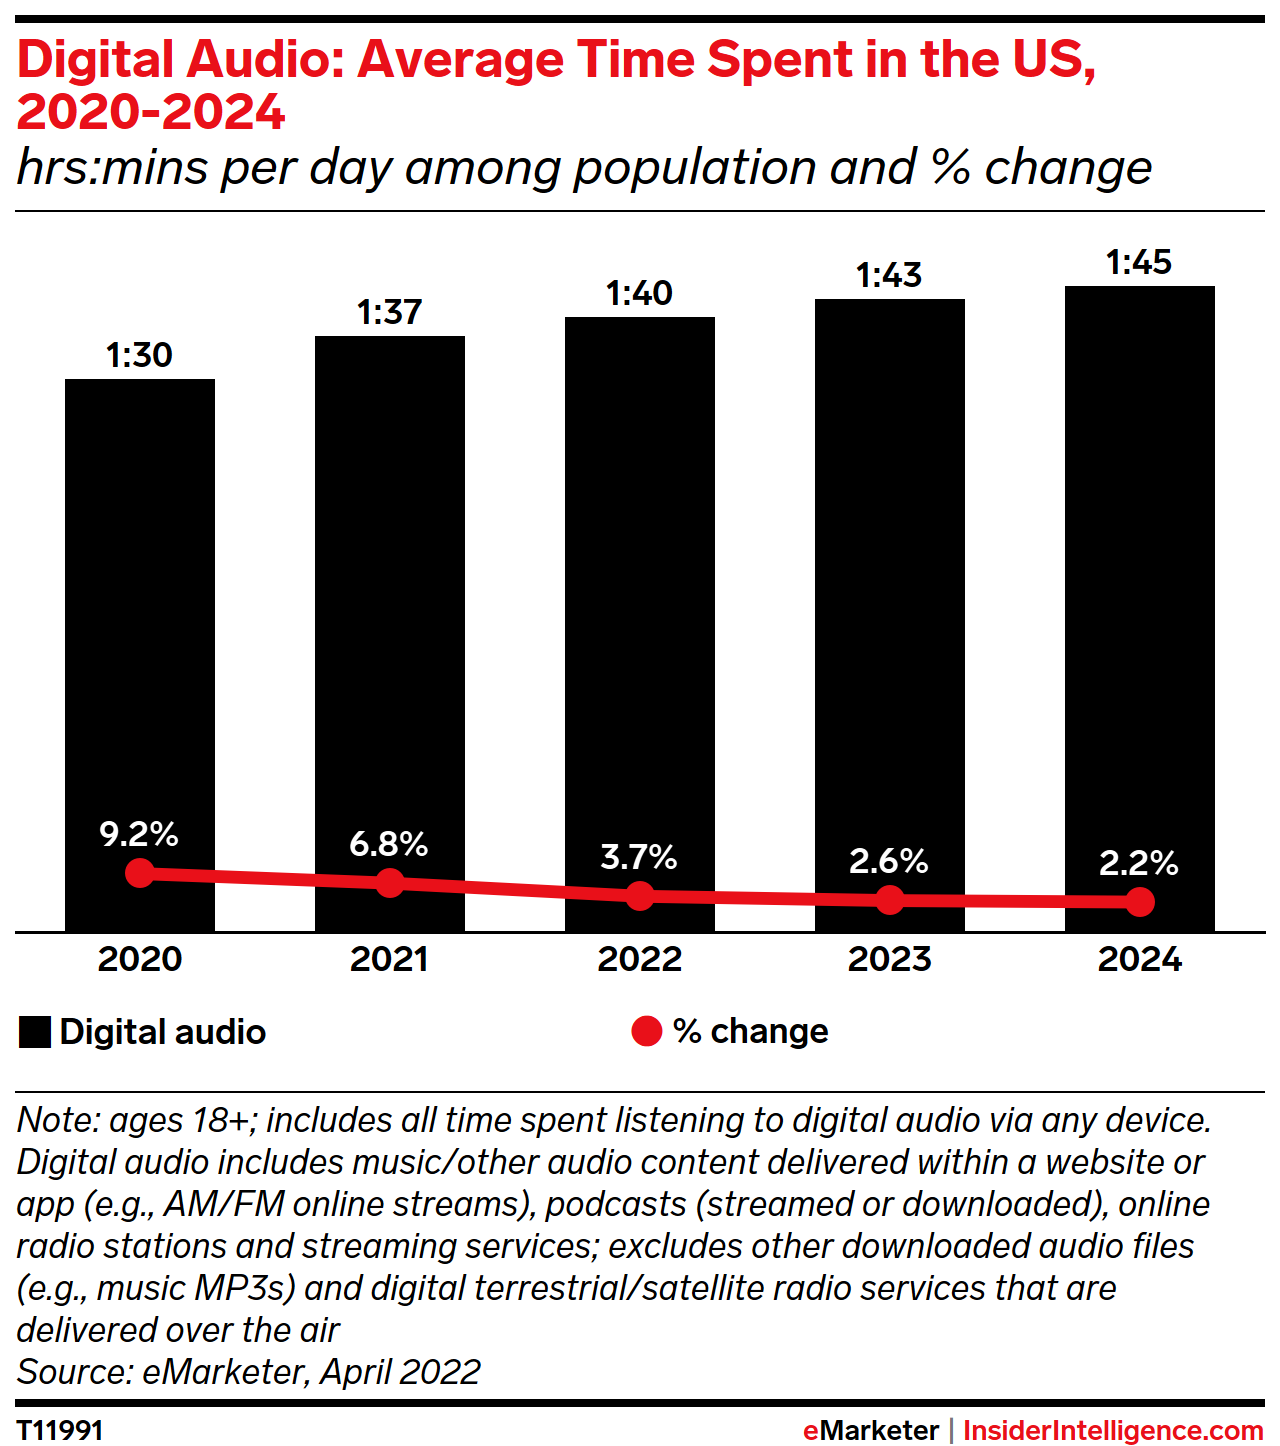 Digital Audio: Average Time Spent in the US, 2020-2024 (hrs:mins per day among population and % change)